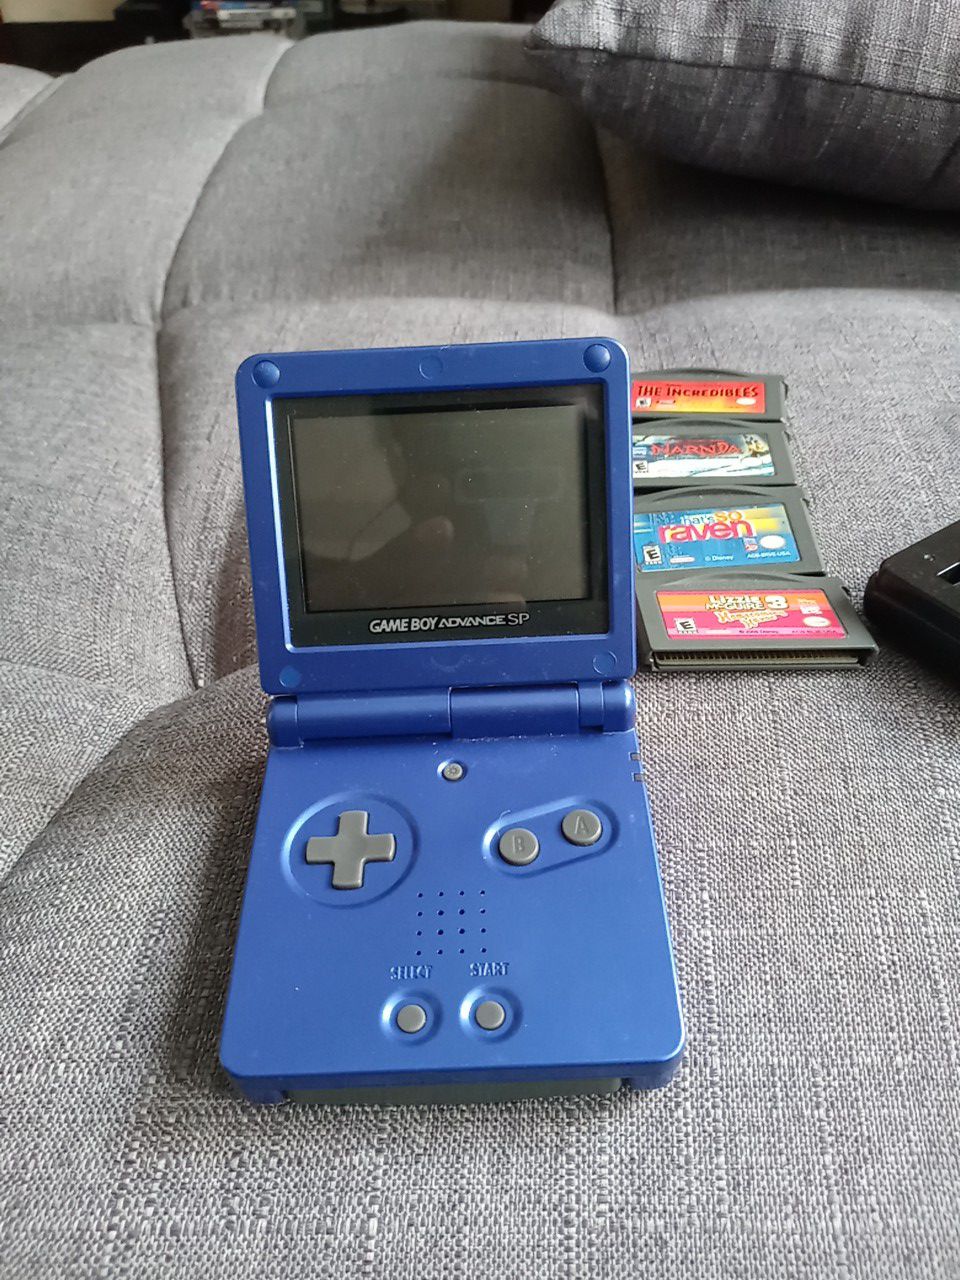 Game Boy advance sp! In great condition!